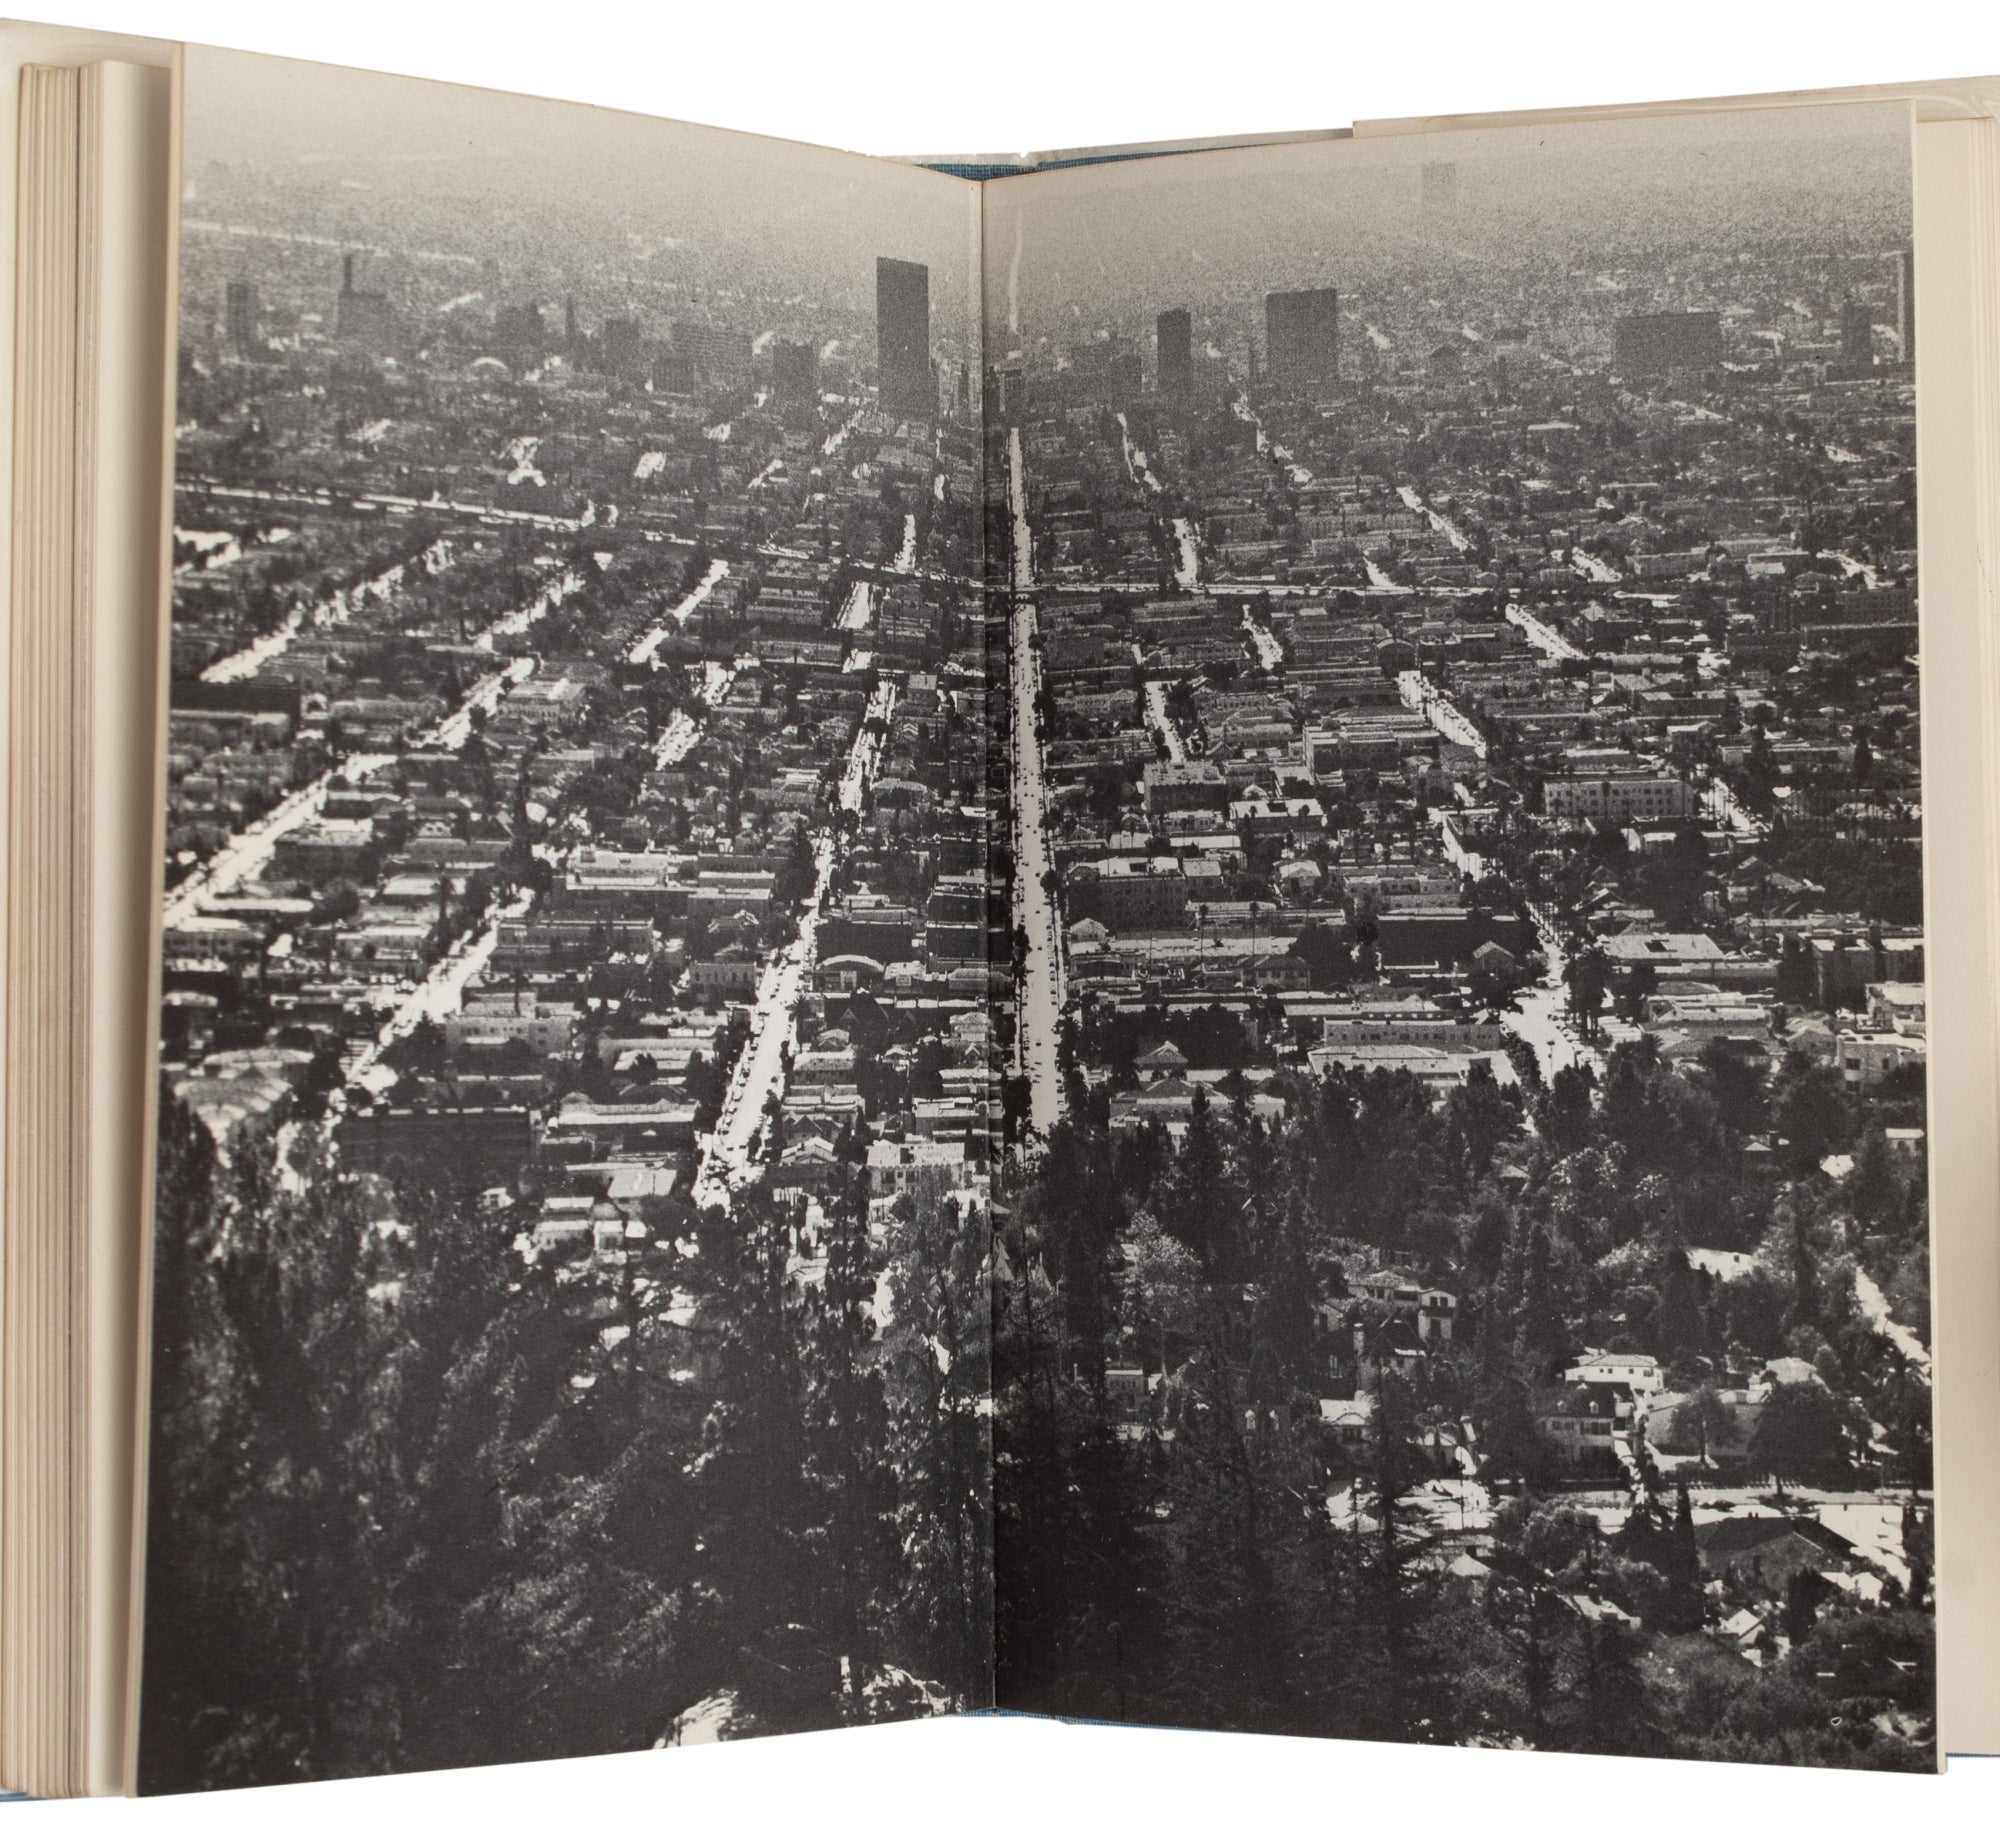 Reyner Banham's “Los Angeles: The Architecture of Four Ecologies